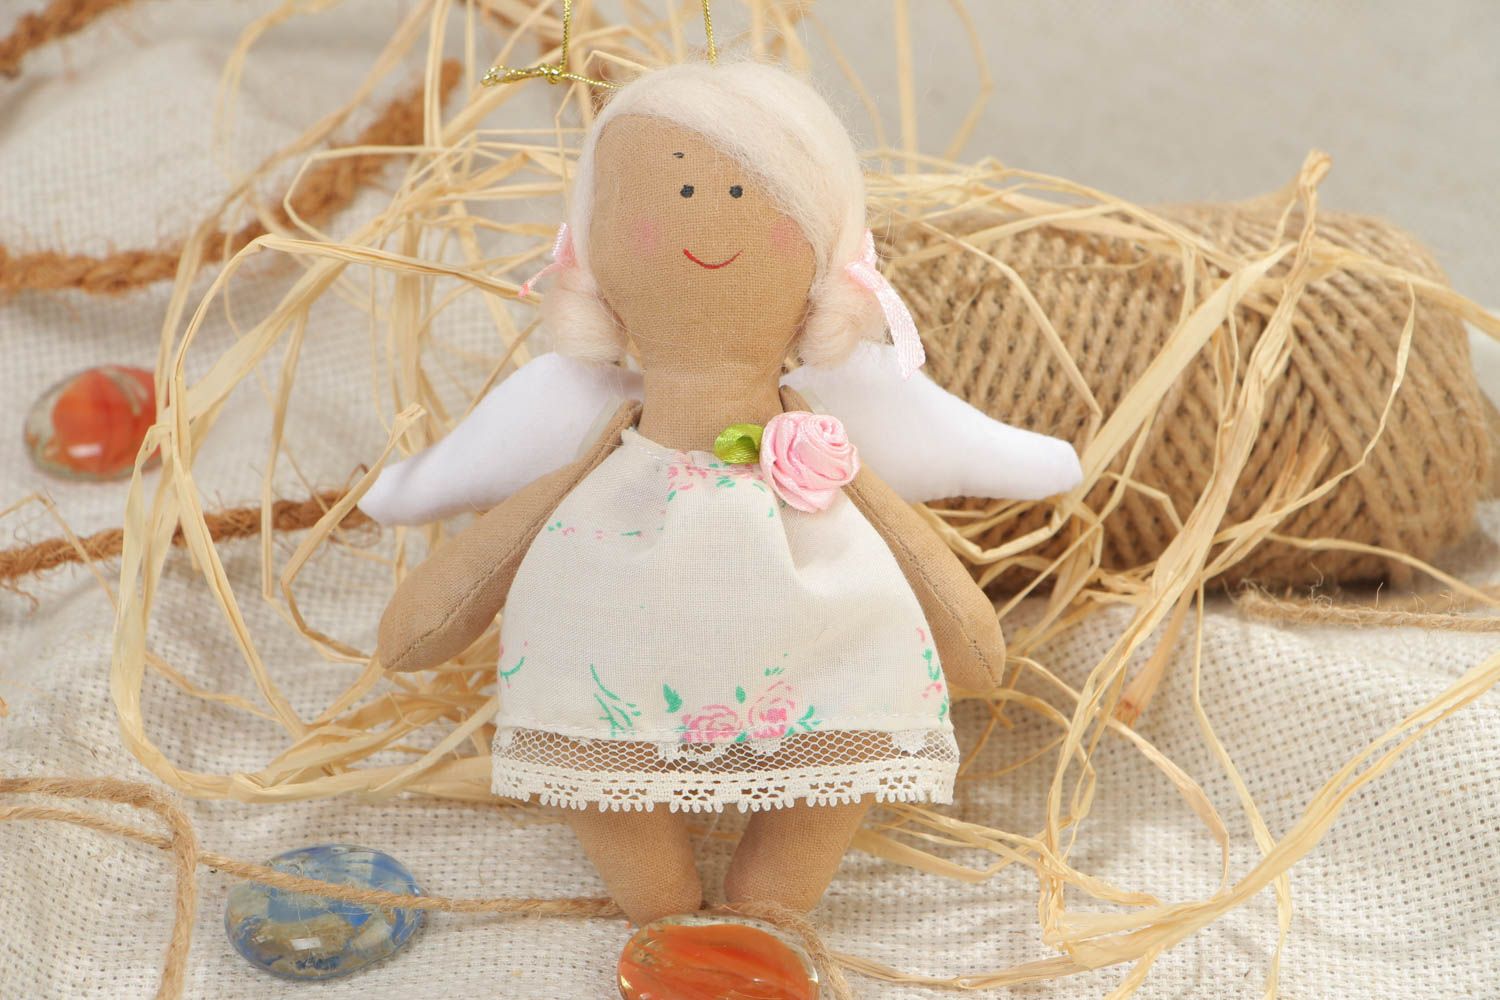 Handmade designer soft doll sewn of cotton in the shape of angel in white dress photo 1